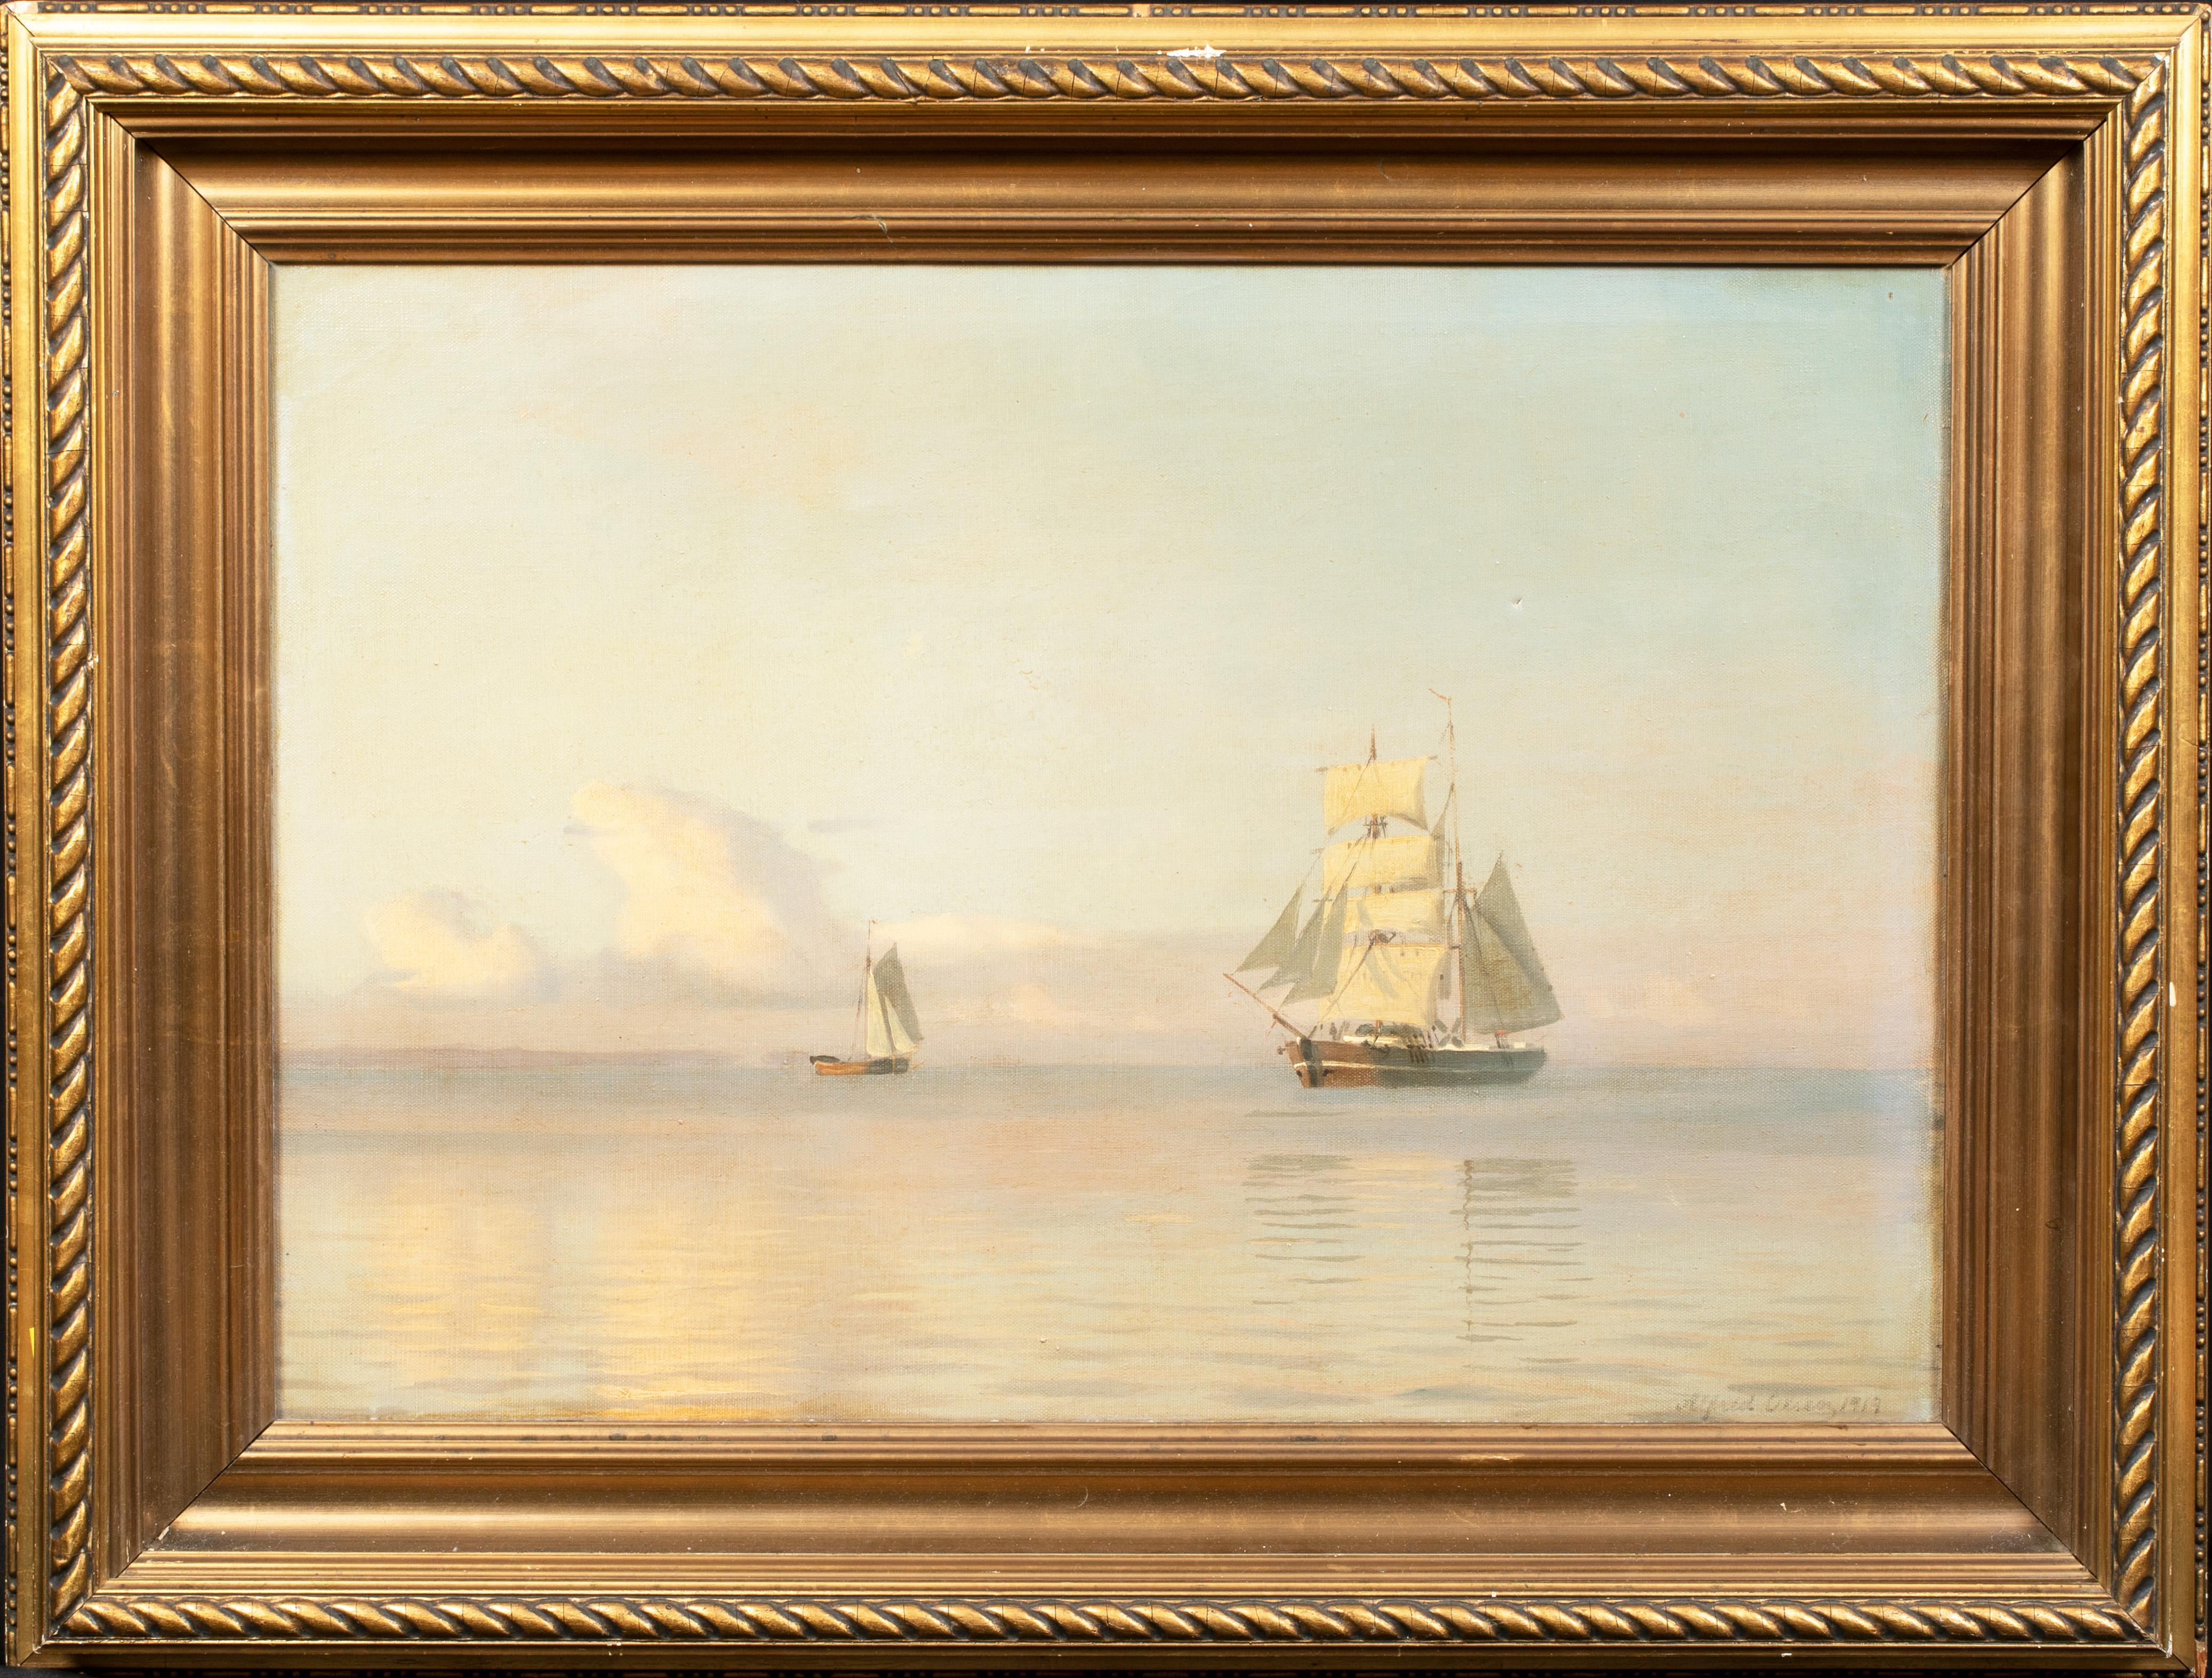 Alfred Theodor Olson Landscape Painting - Brigantine Ship At Sunset, dated 1919